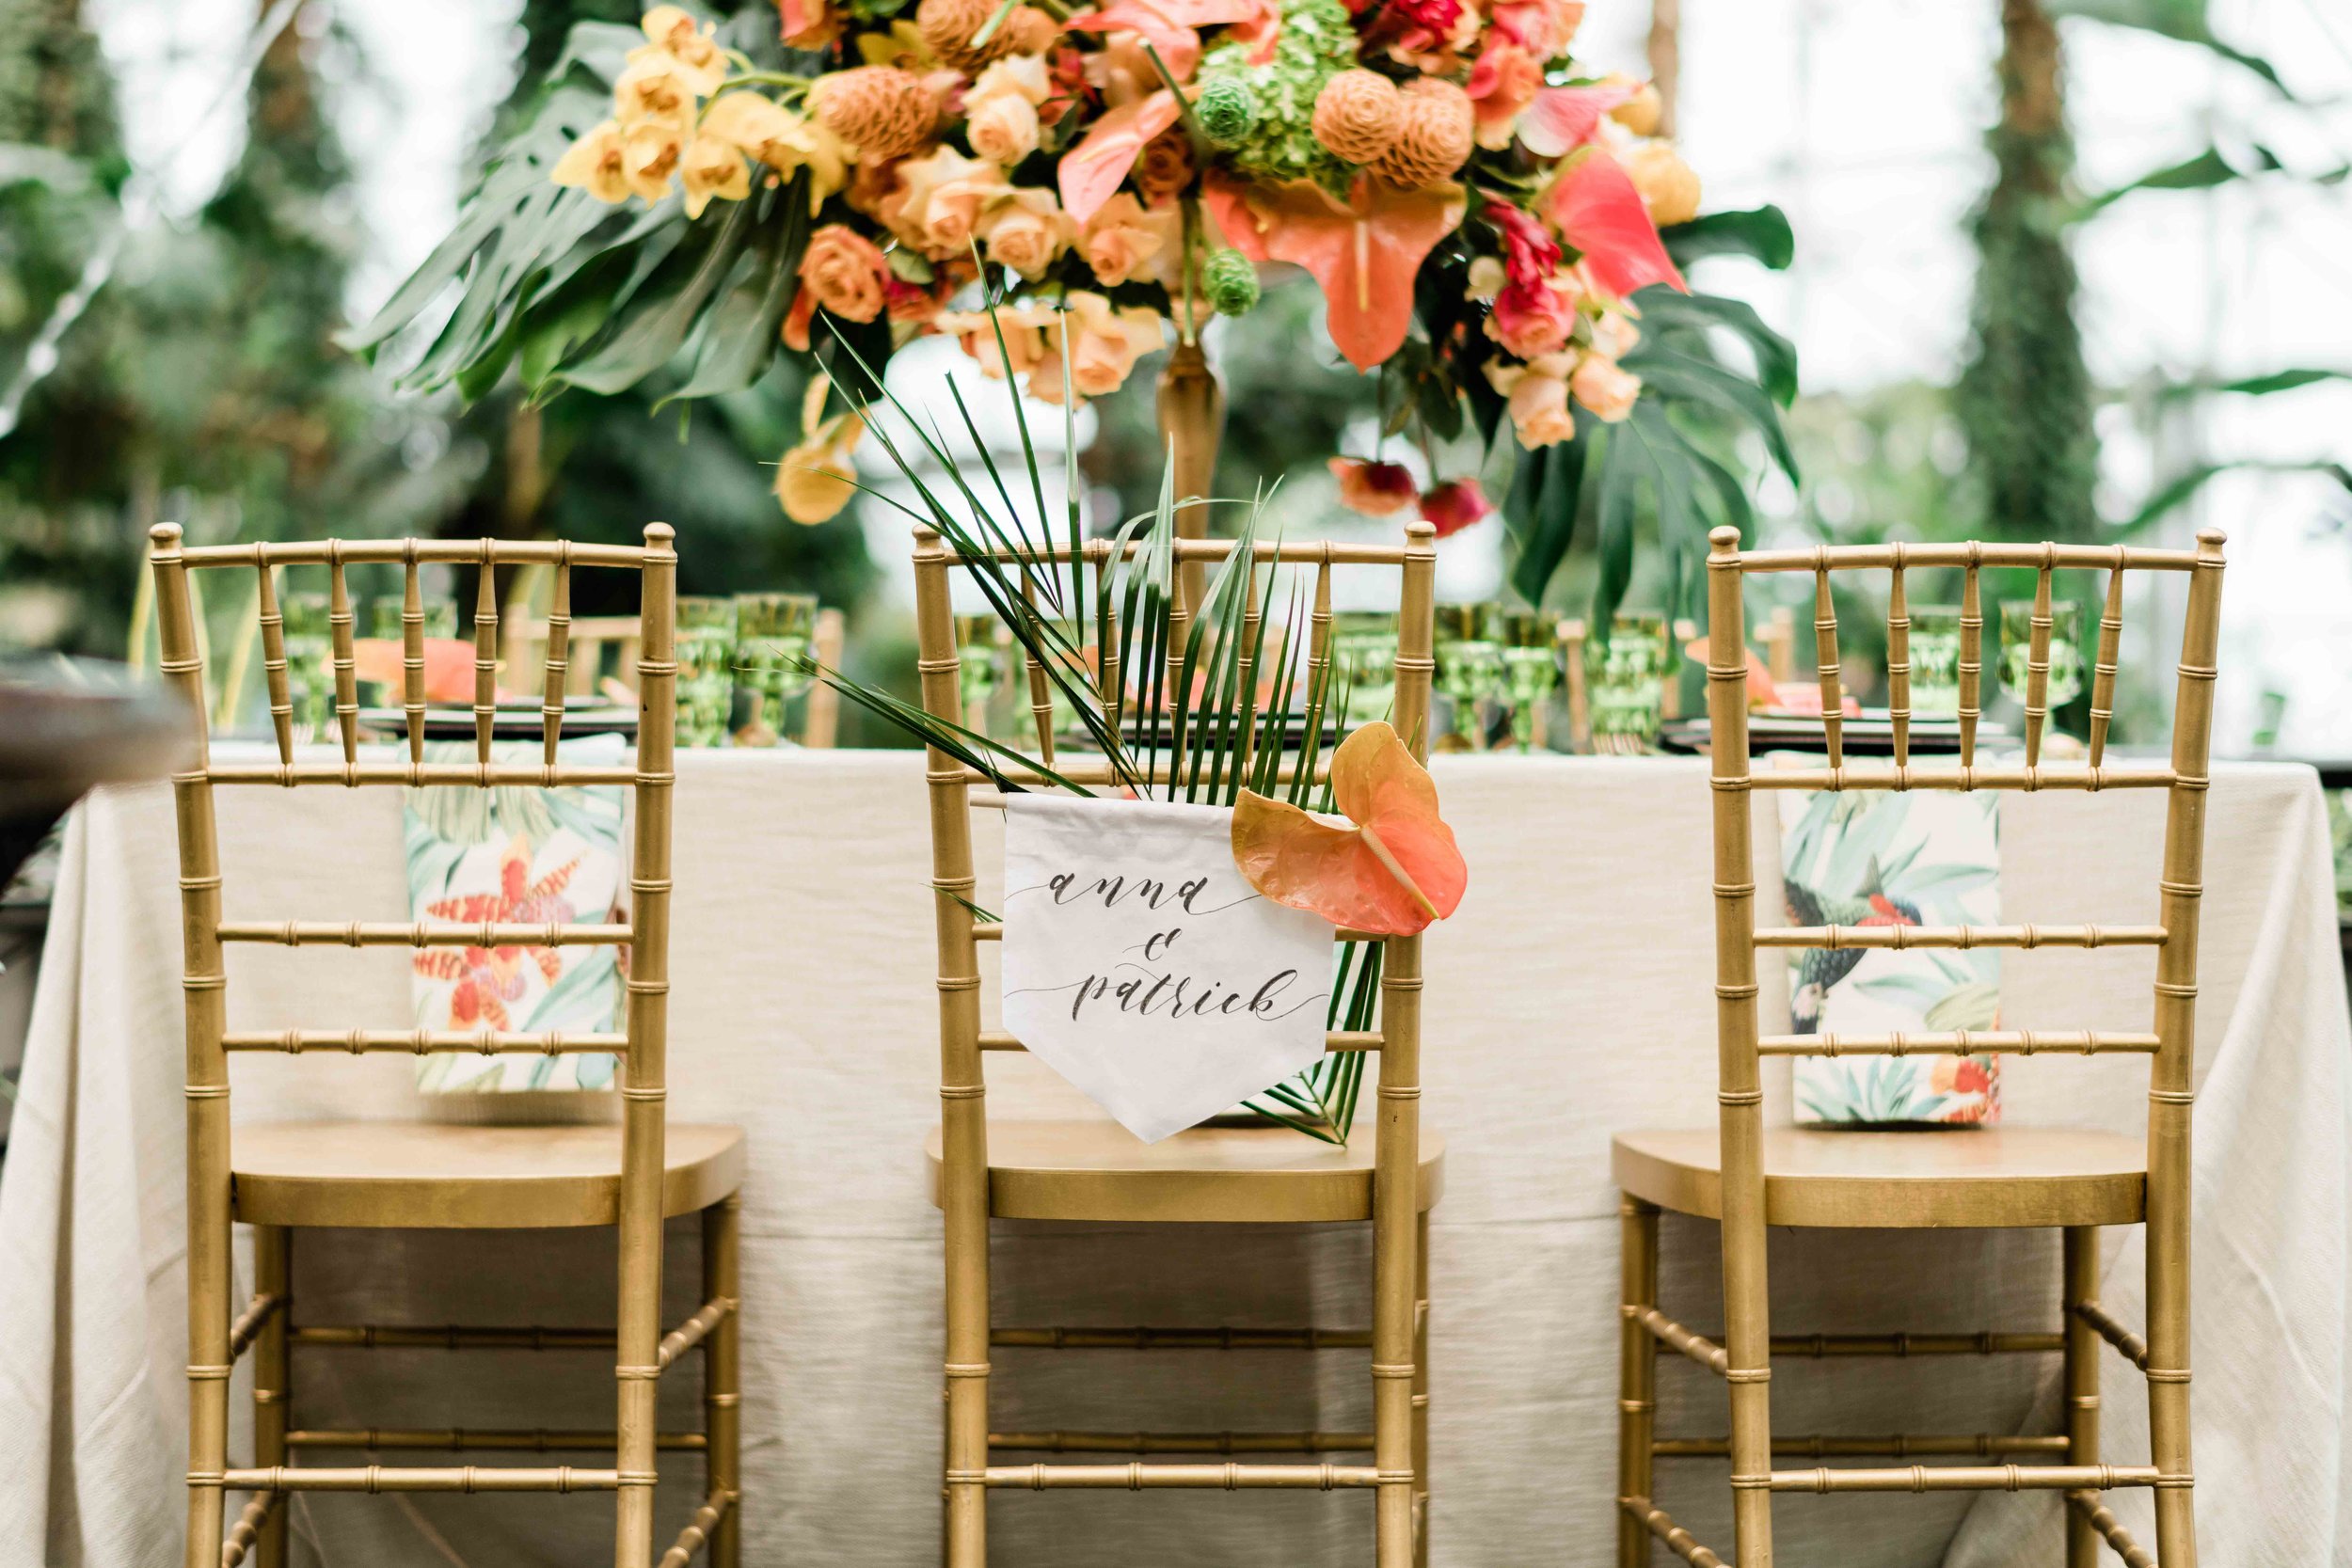 Bride and groom name sign on a chair